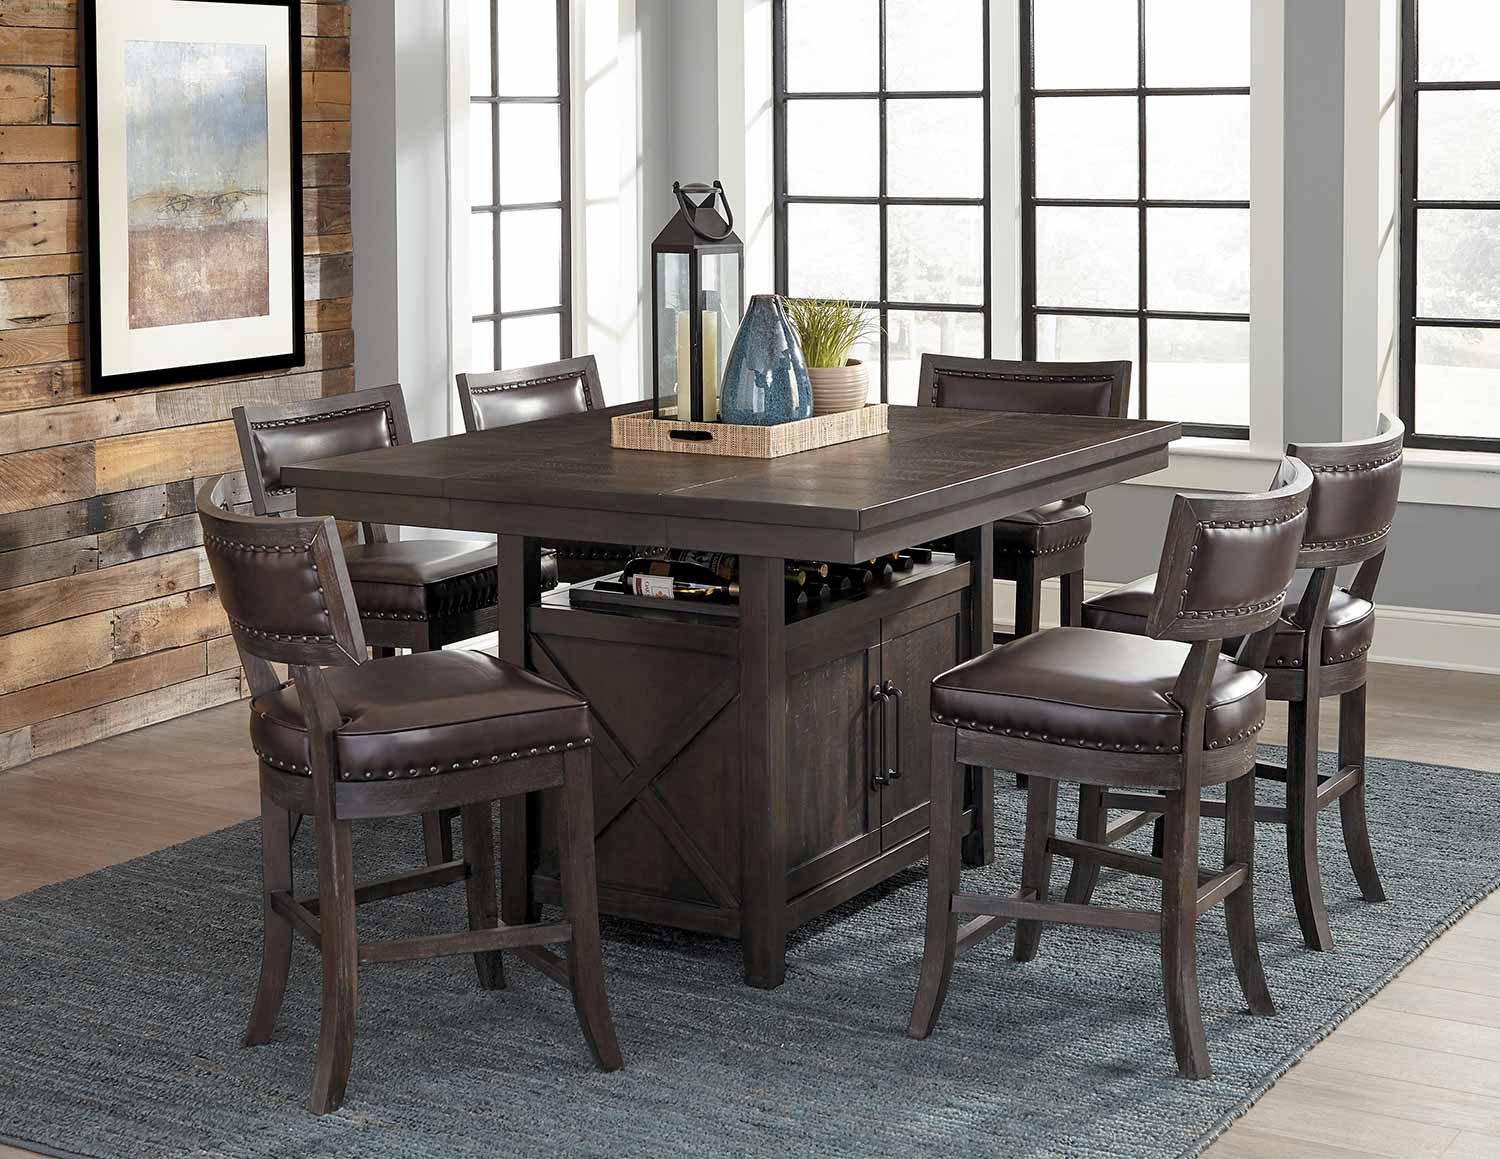 Homelegance Oxton Counter Height Dining Set - Rustic Brown